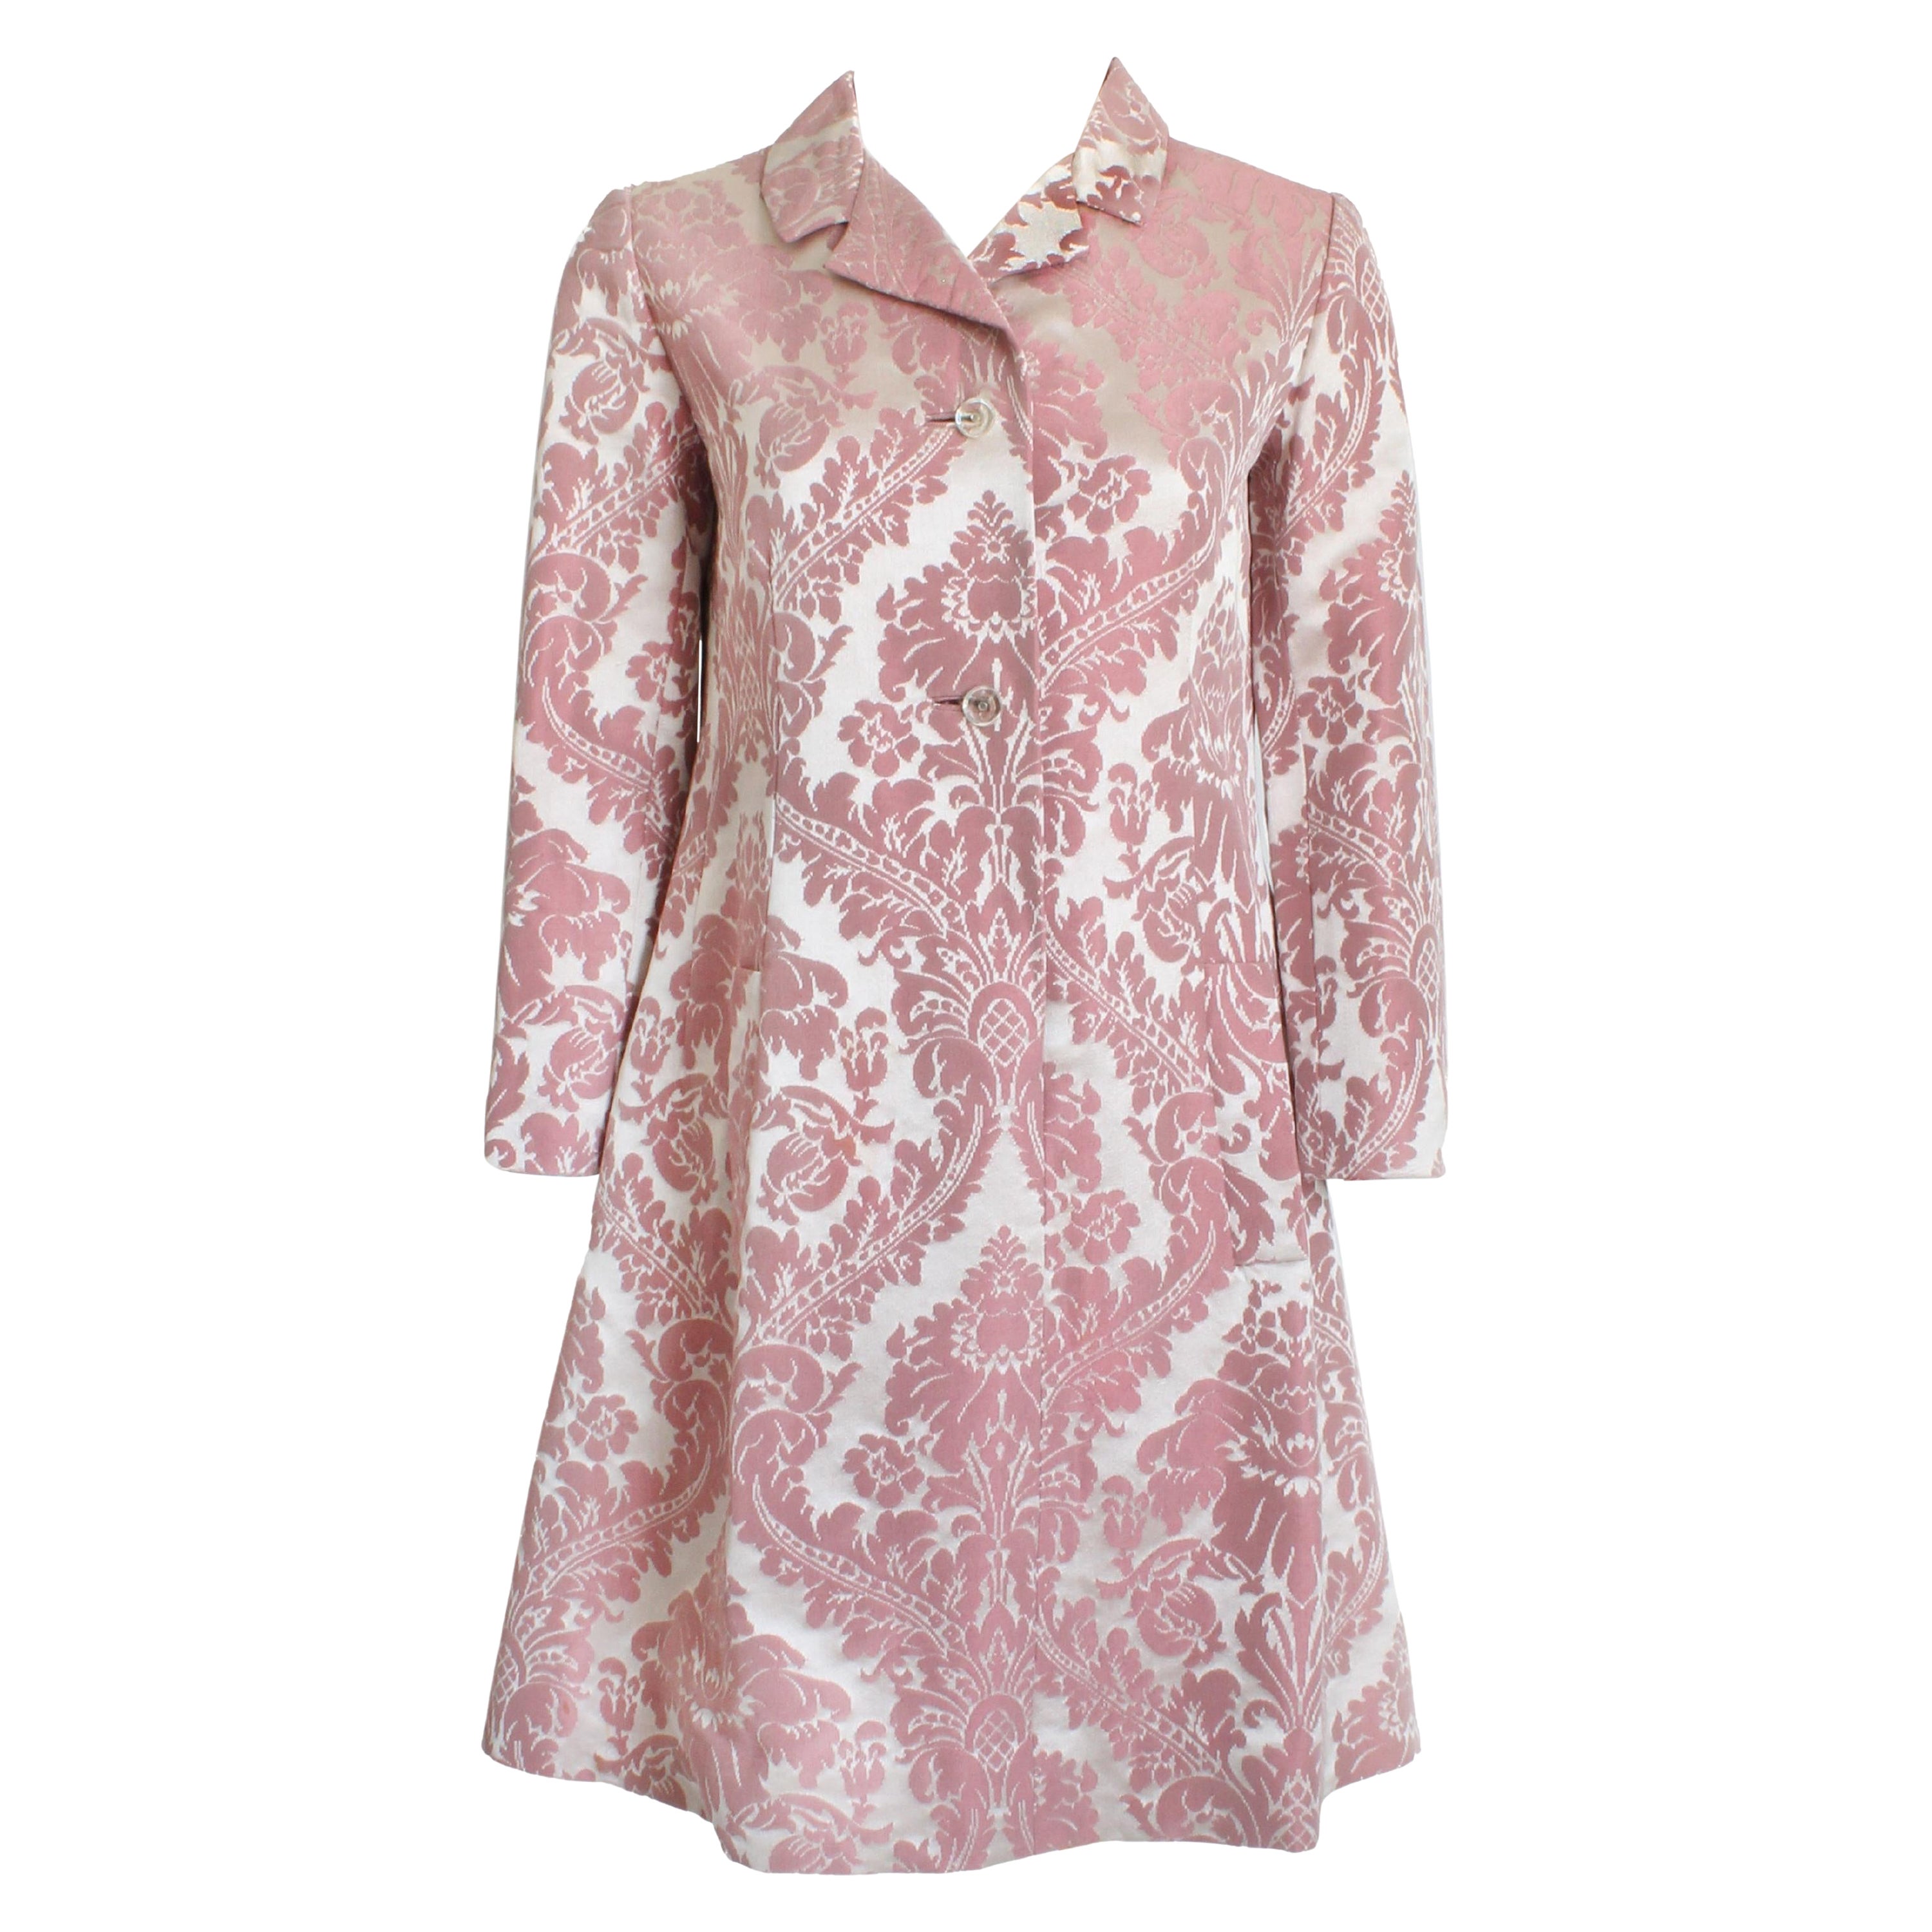 This fabulous coat dress was made by Chester Weinberg and sold by the Oval Room at Daytons, most likely in the mid 60s.   Made from a gorgeous pink floral damask, it has an incredible sheen to the fabric! It slips over the head and fastens with